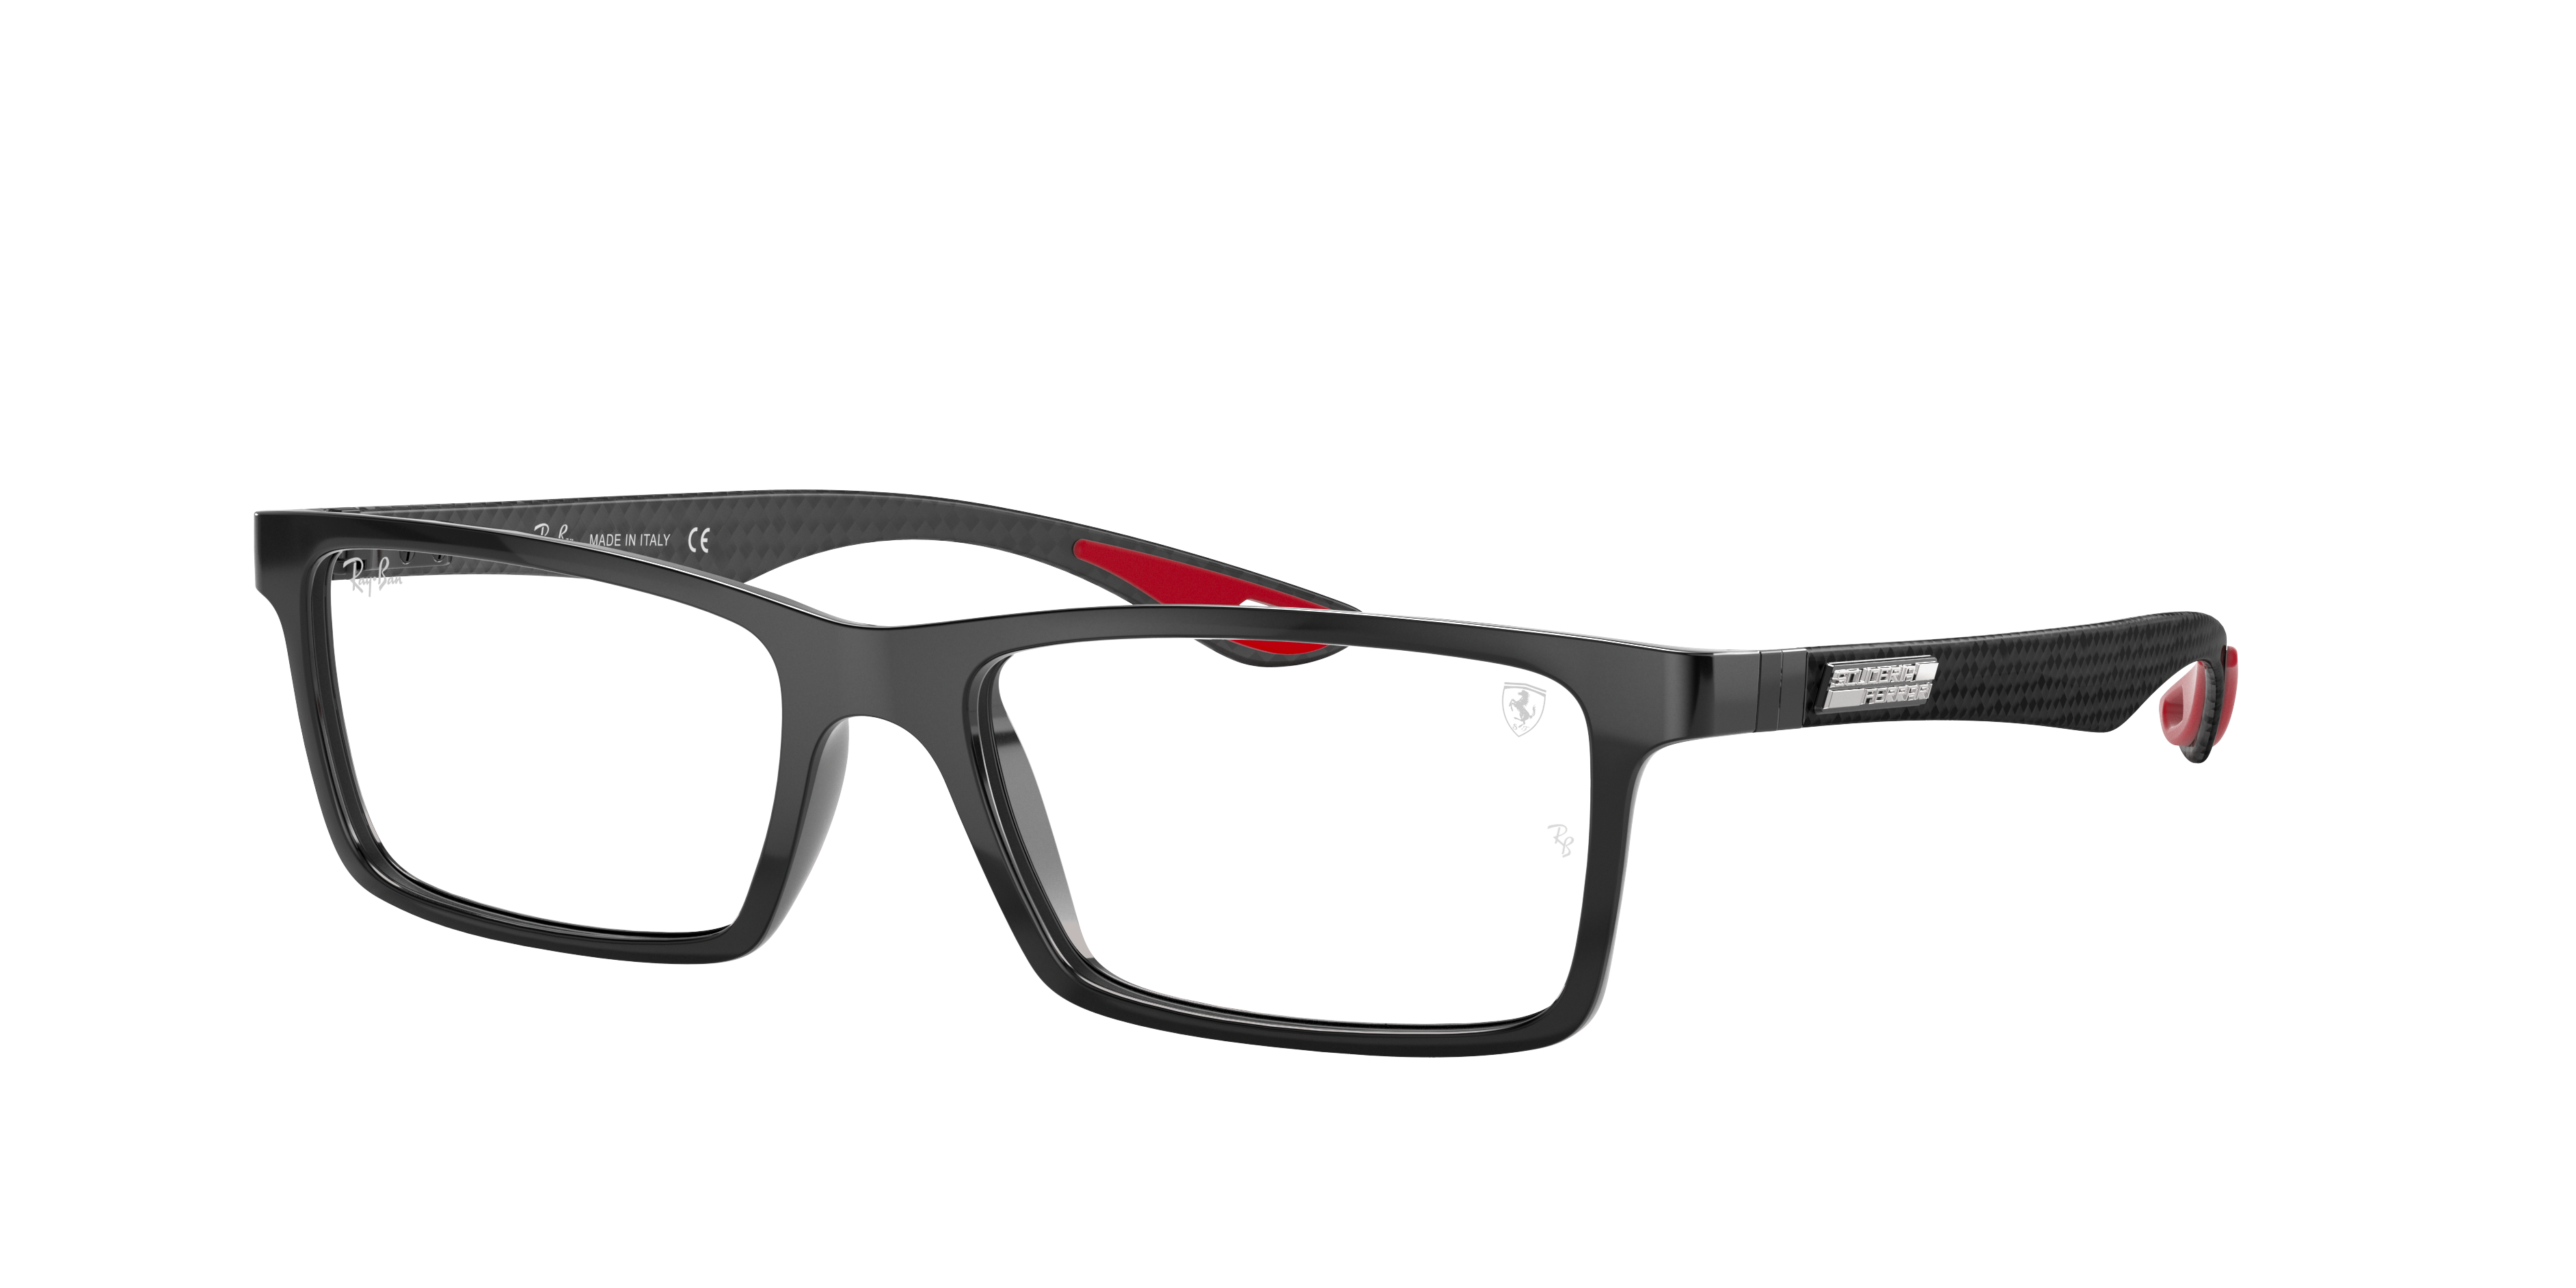 Rb8901m Scuderia Ferrari Collection Eyeglasses with Black Frame | Ray-Ban®